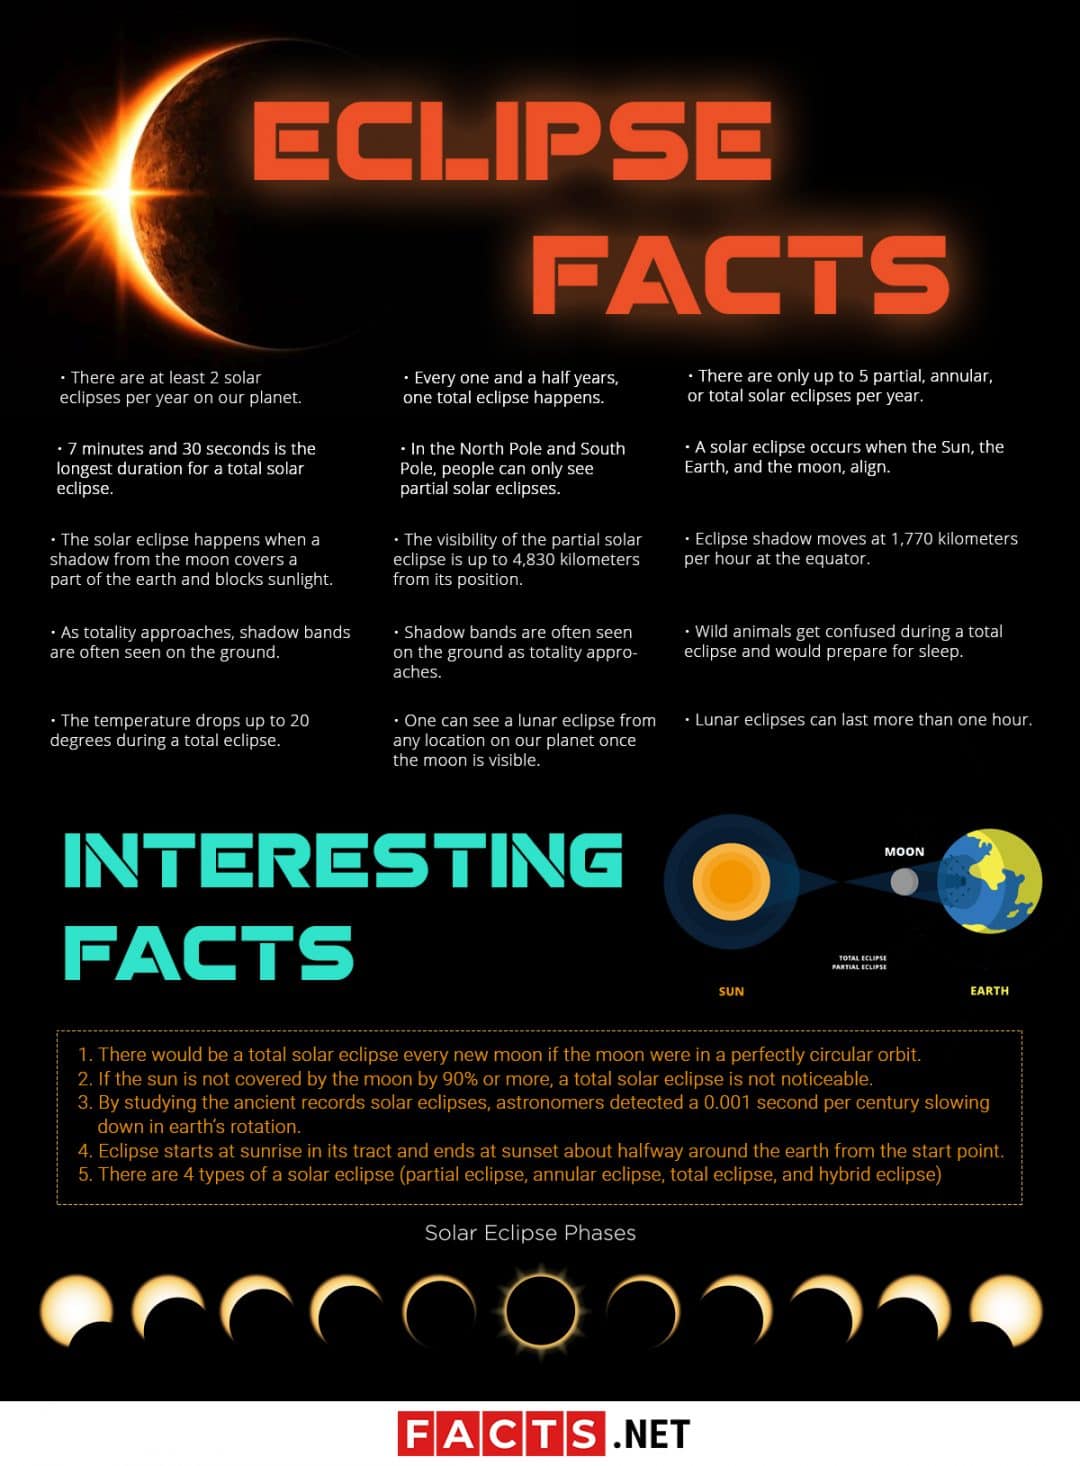 27 Interesting Facts About Solar Eclipse That You Might Not Know